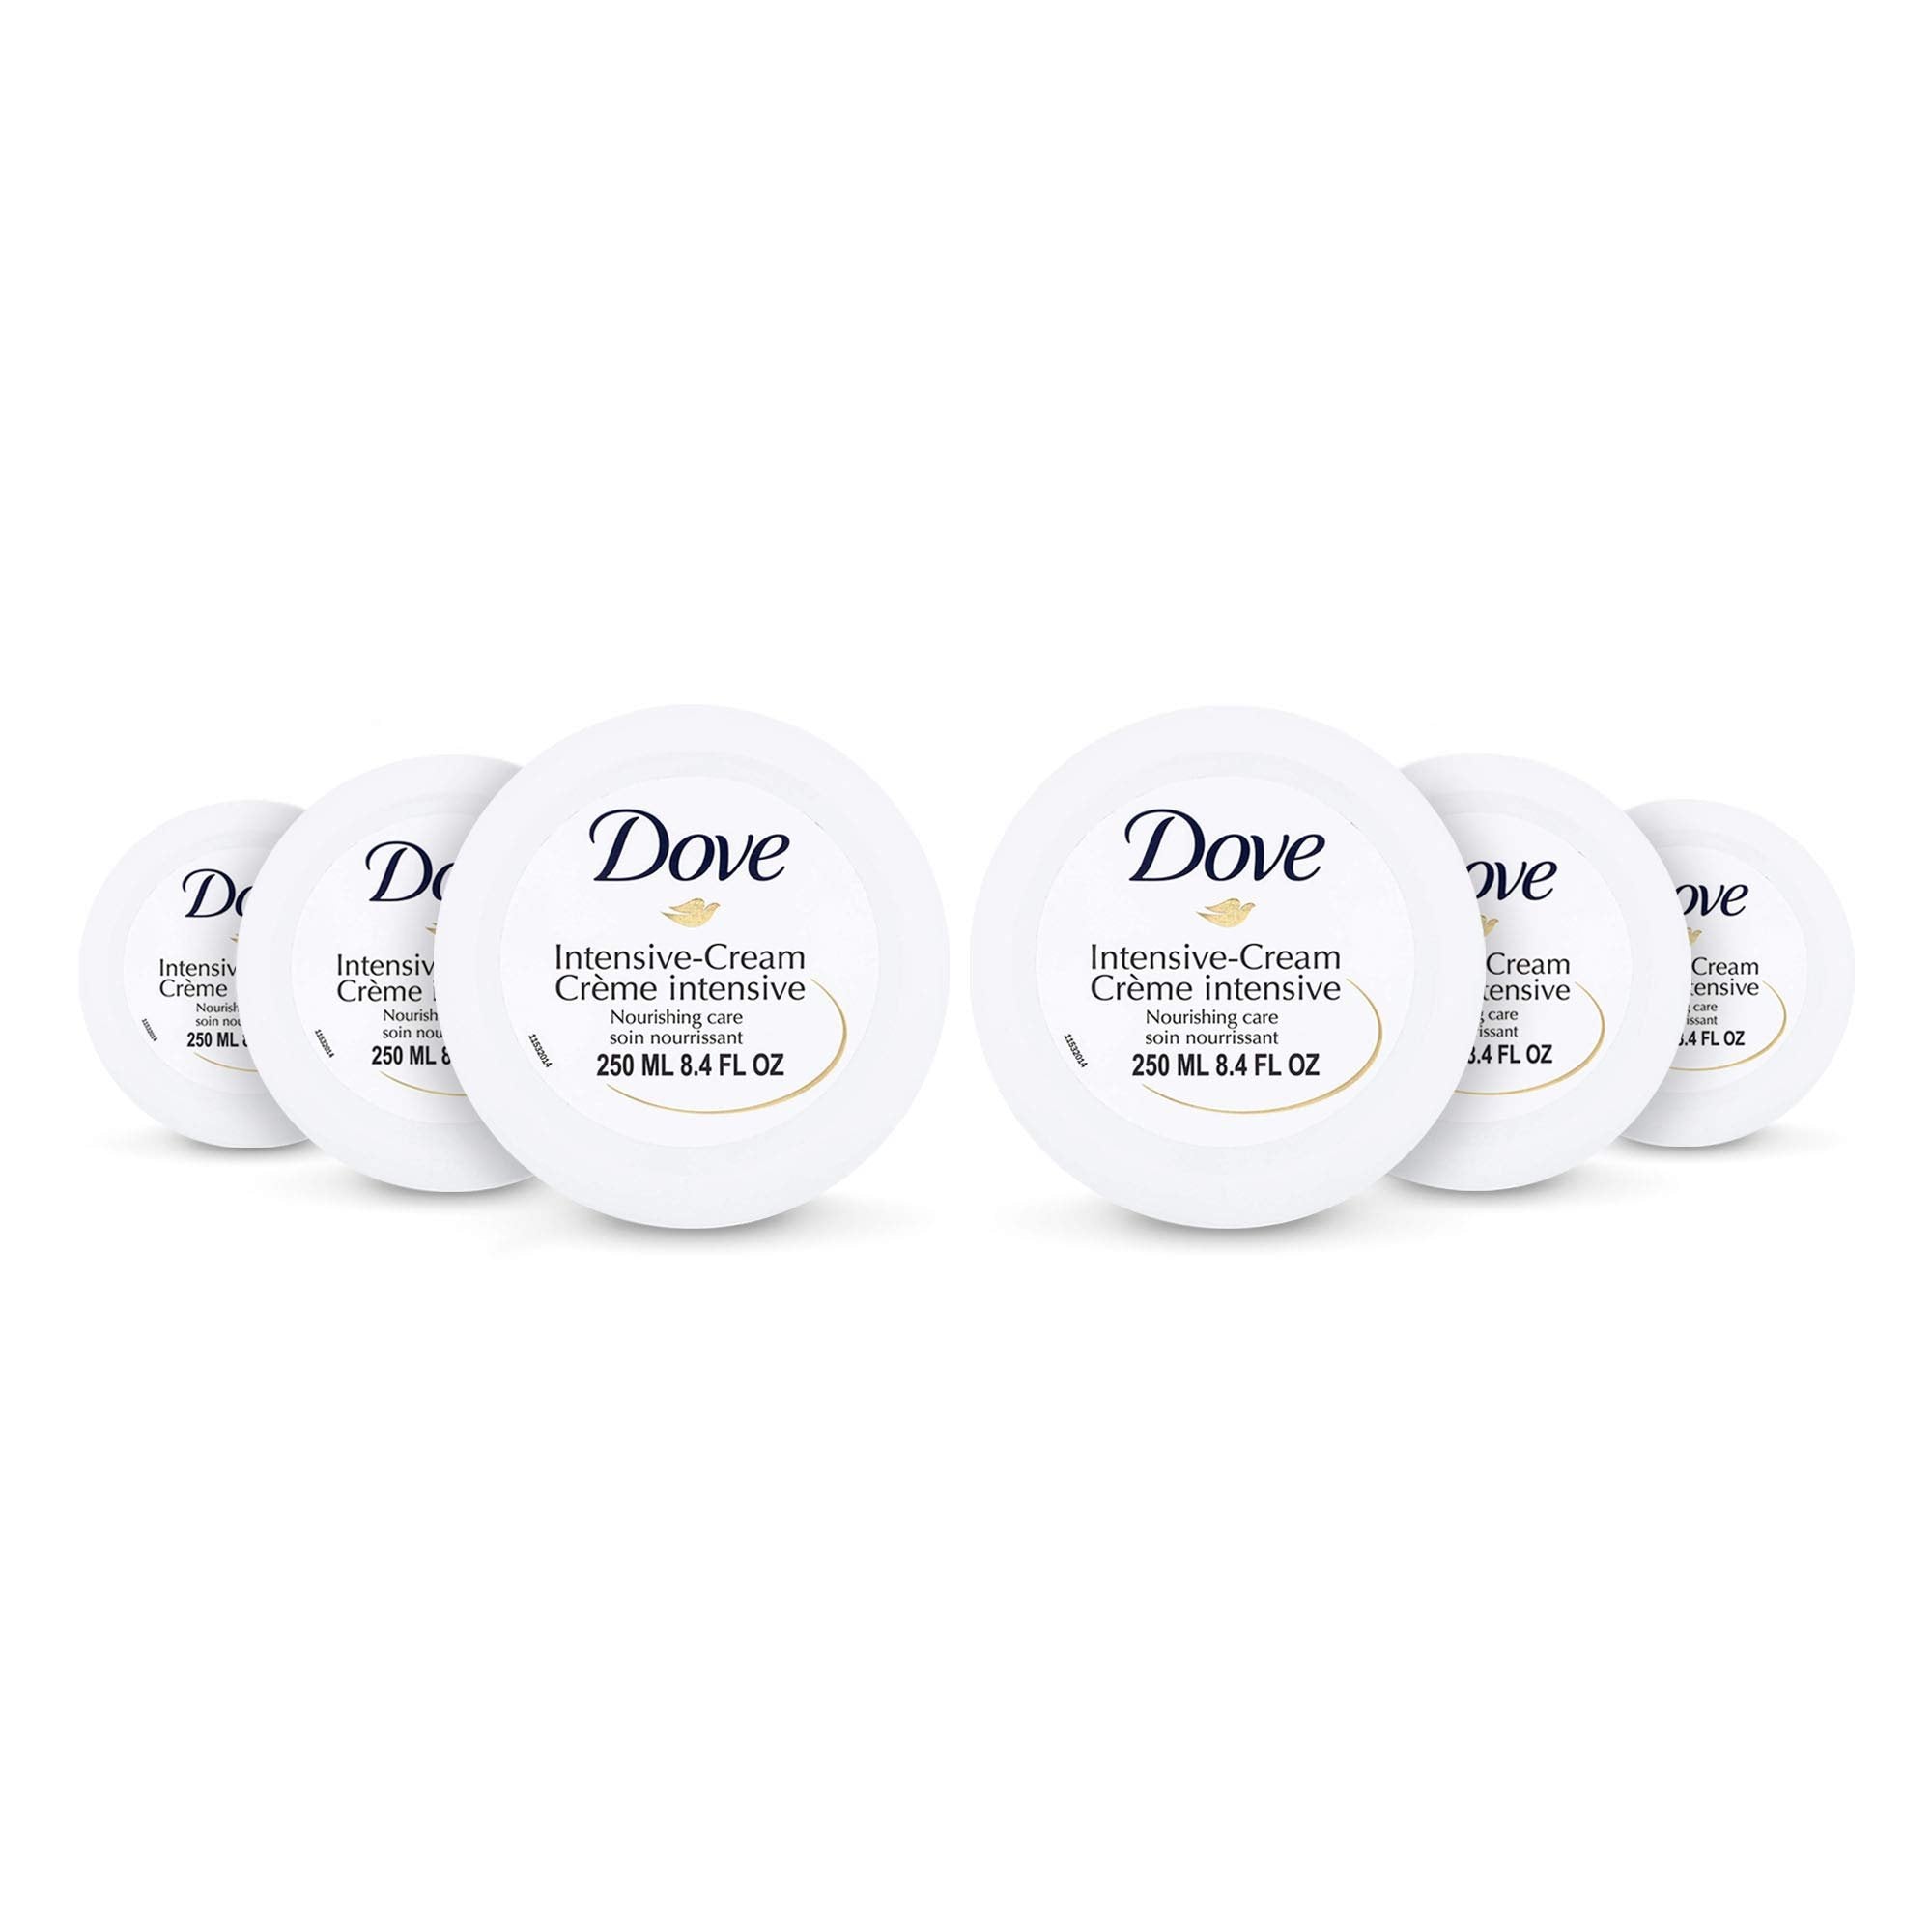 Dove Nourishing Body Care Face, Hand and Body Rich Nourishment Cream for Extra Dry Skin with 48 Hour Moisturization, 8.4 FL OZ (Pack of 6)6